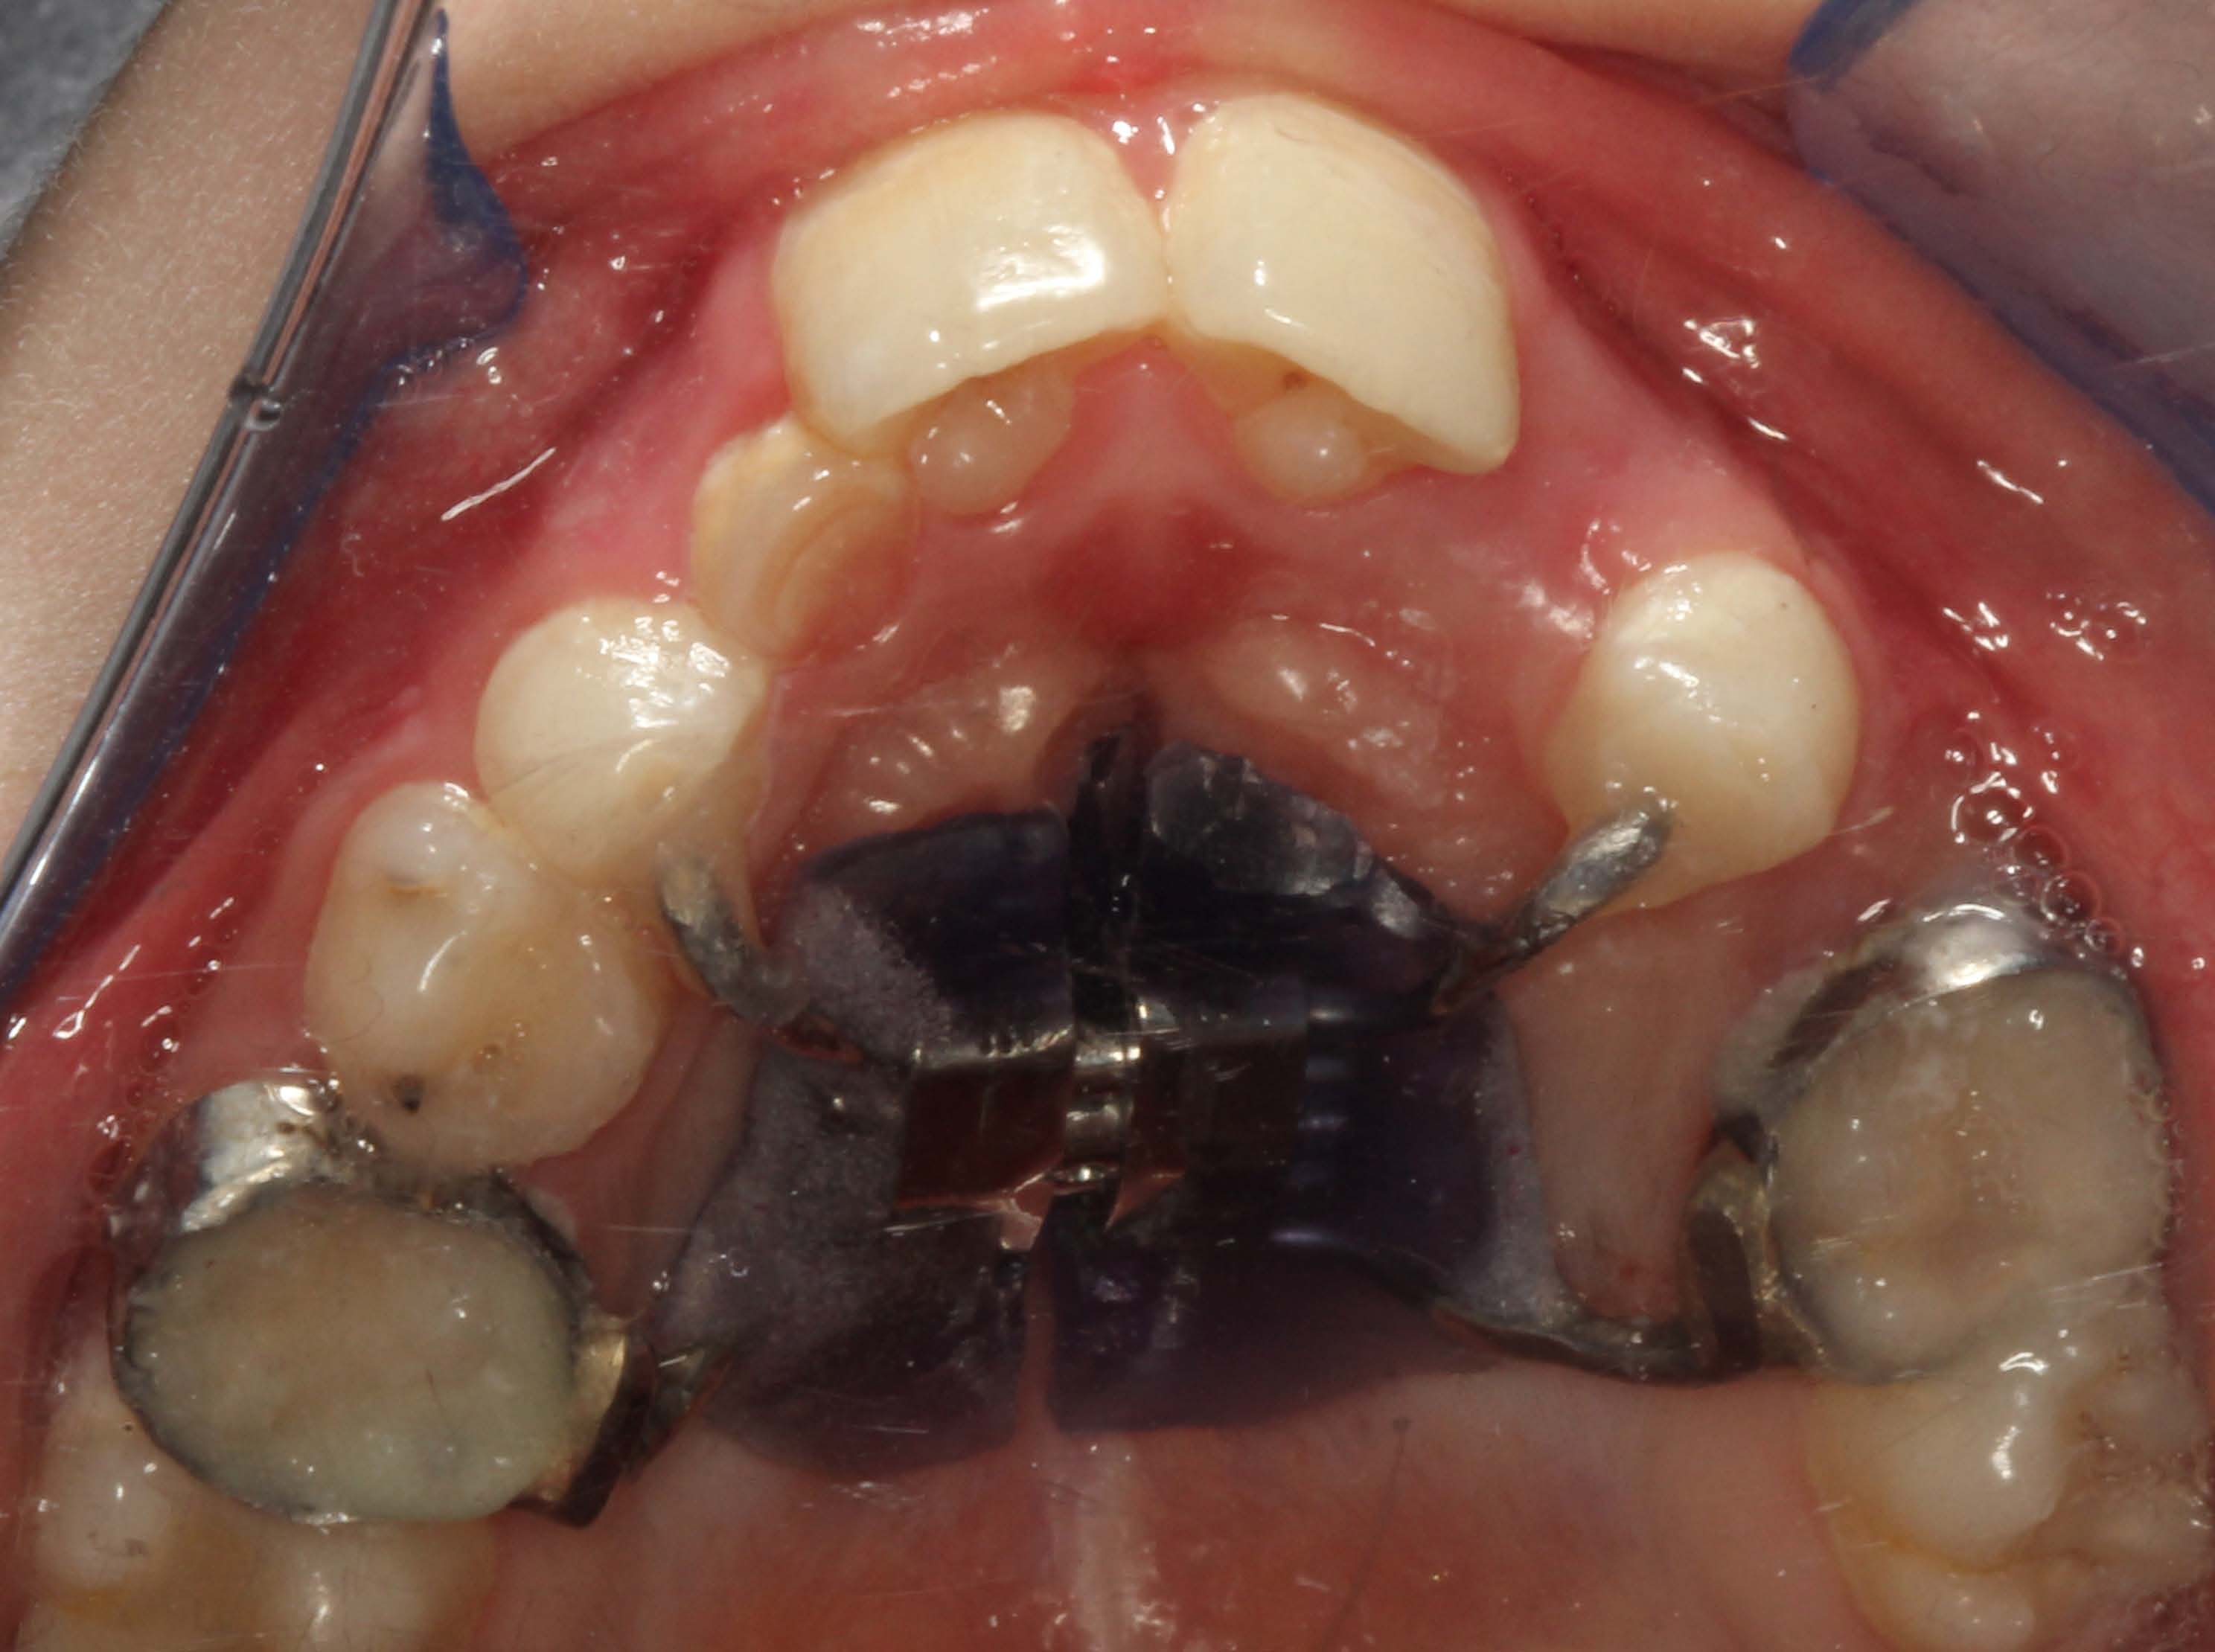 Rubinstein-Taybi syndrome: principal oral and dental disorders and